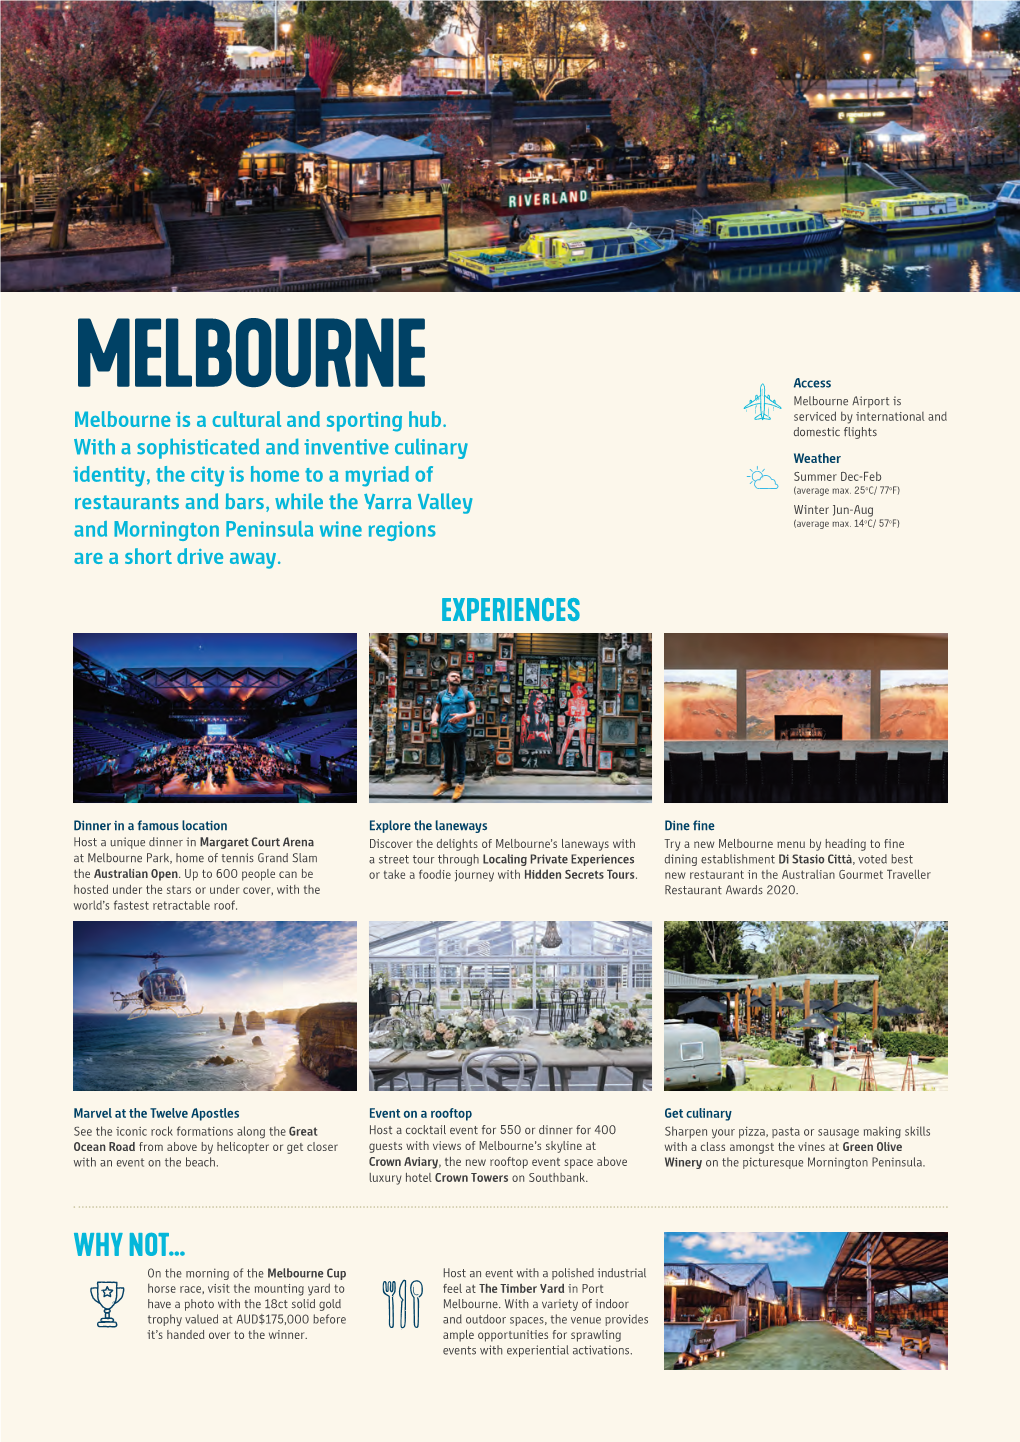 Melbourne Melbourne Airport Is Melbourne Is a Cultural and Sporting Hub